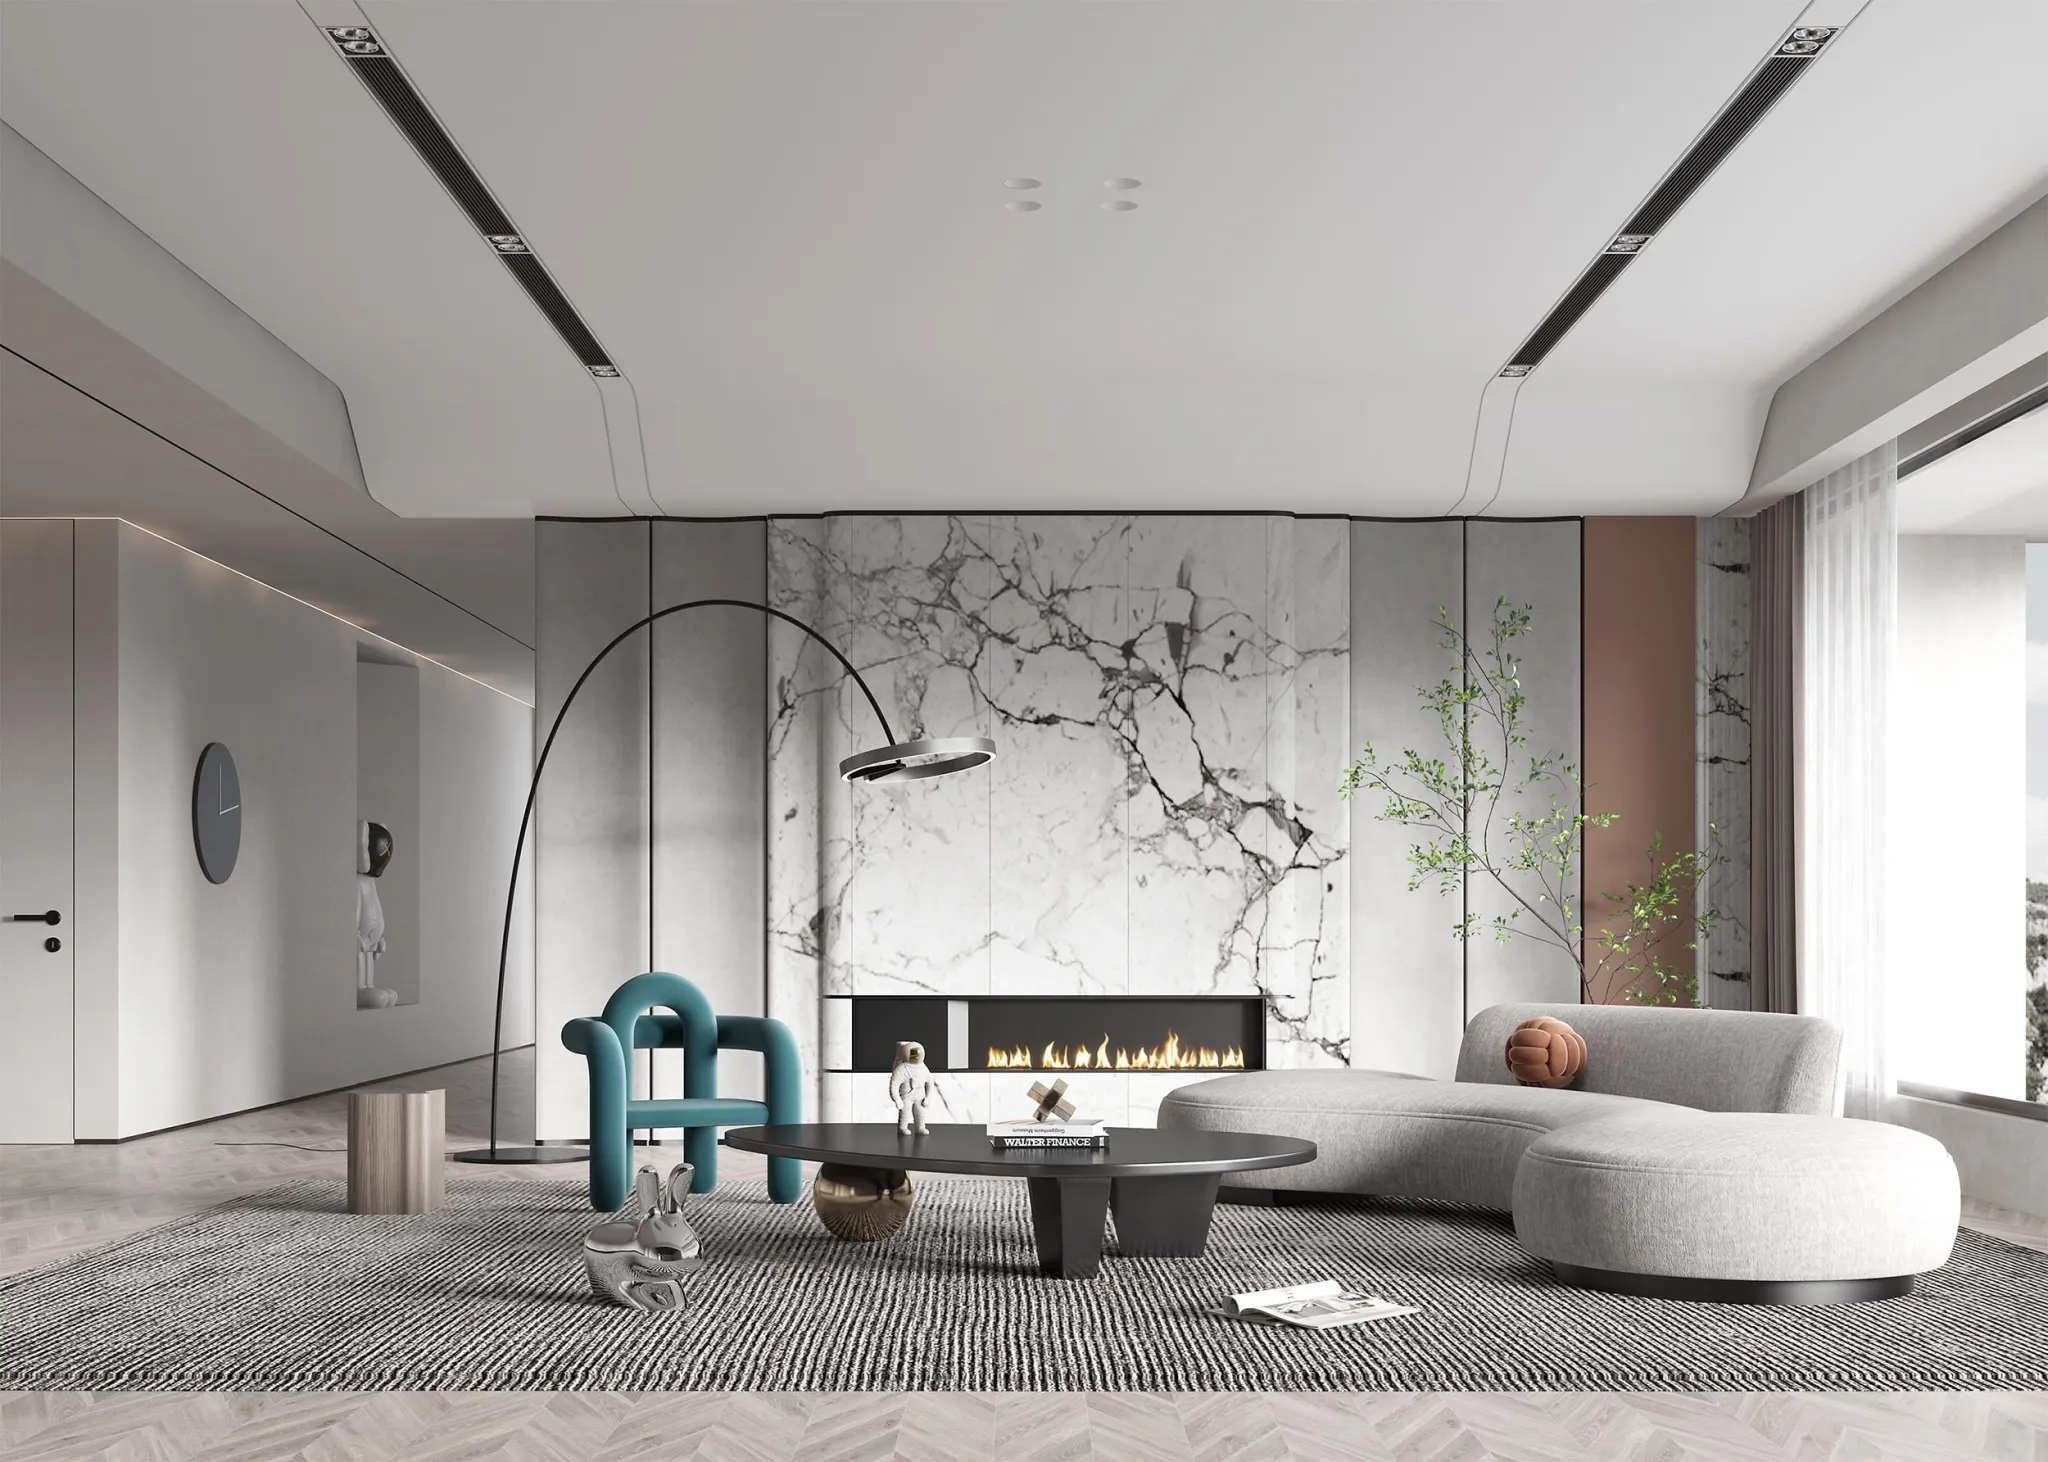 HOUSE SPACE 3D SCENES – LIVING ROOM – 0167